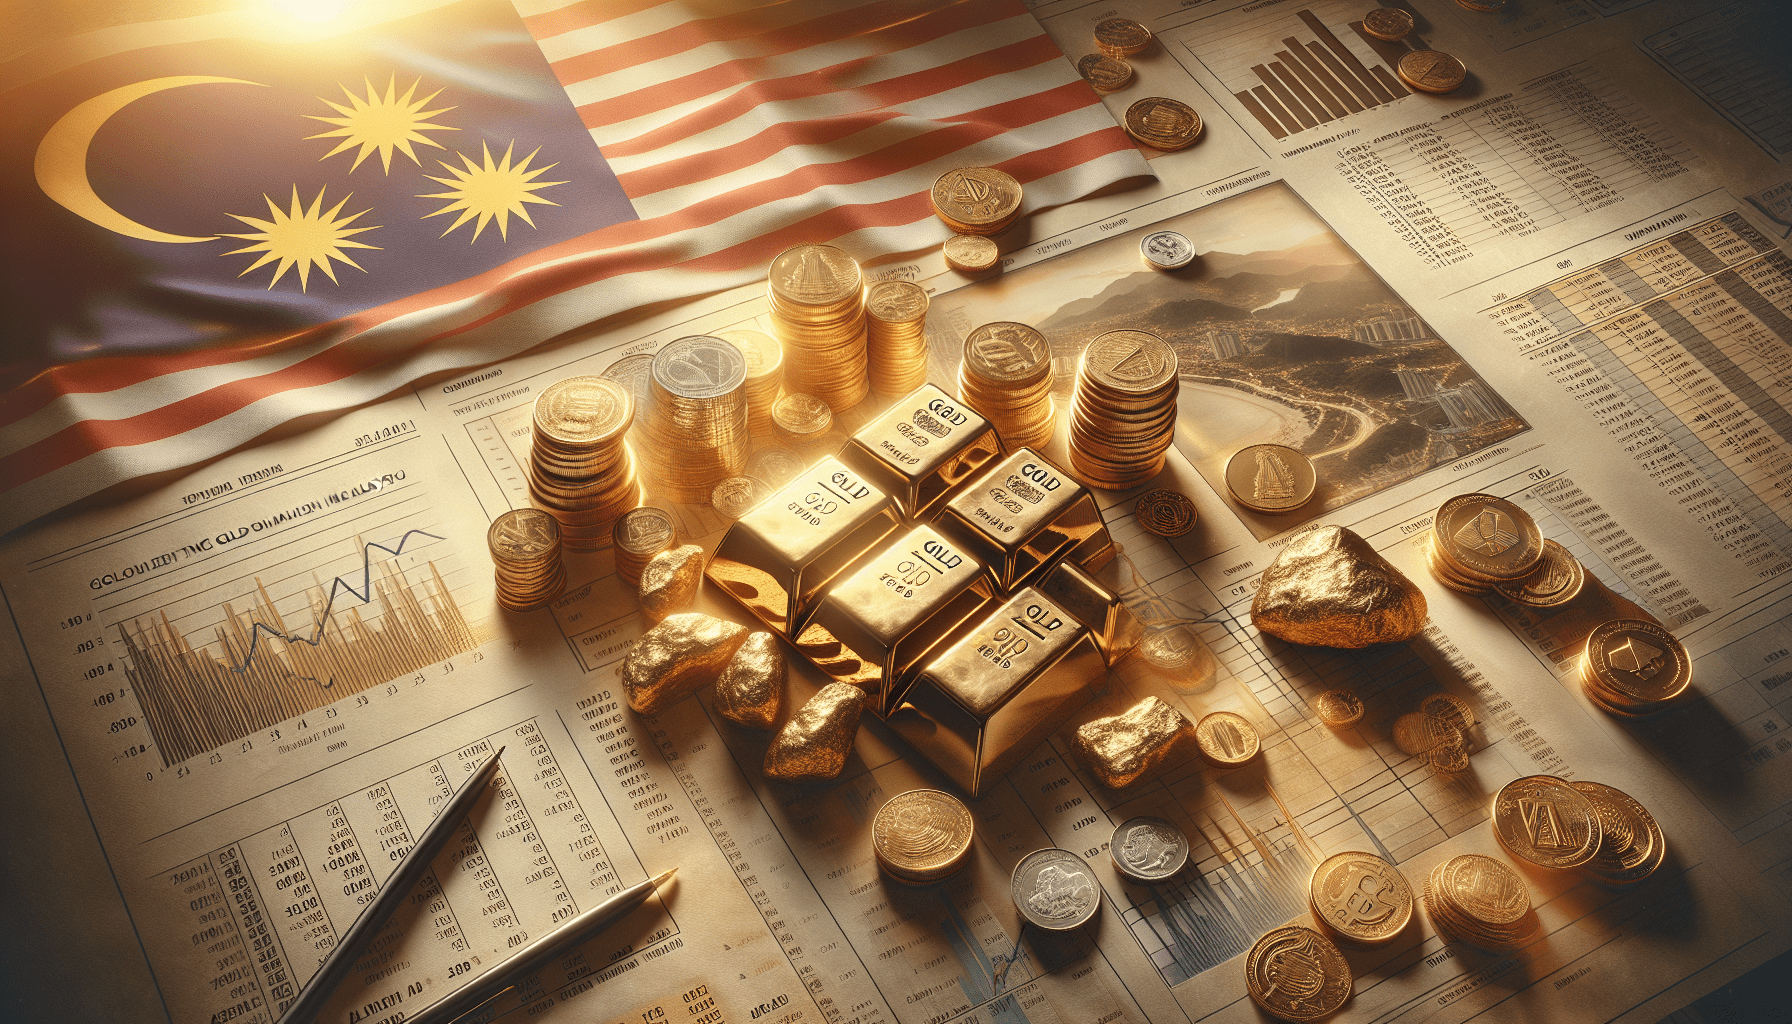 What Are The Different Pricing Structures For Gold Investment In Malaysian Banks?